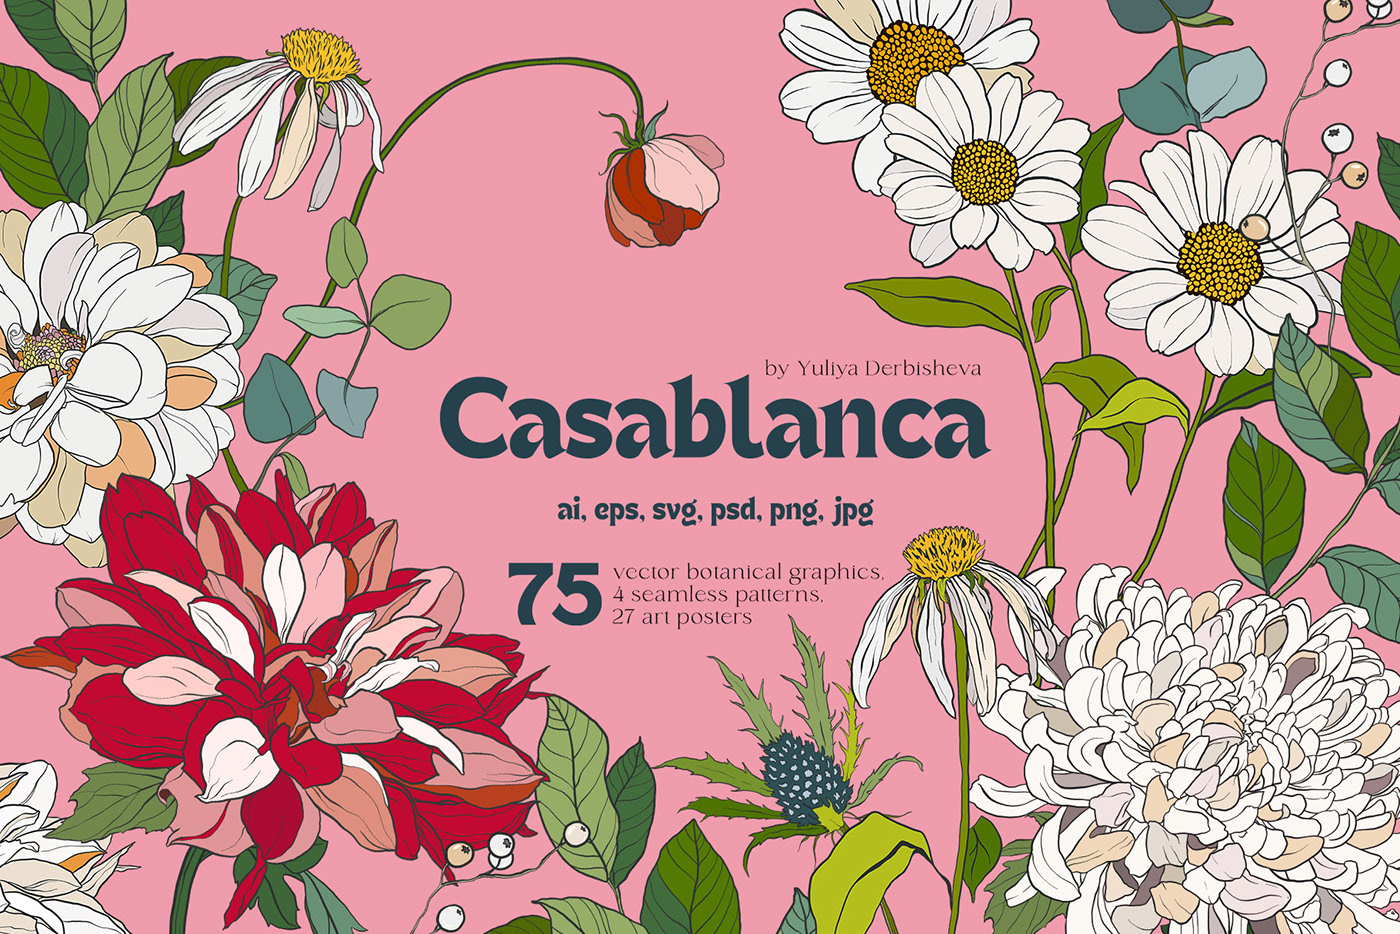 Casablanca modern vector botanical collection with graphics, art posters and seamless patterns